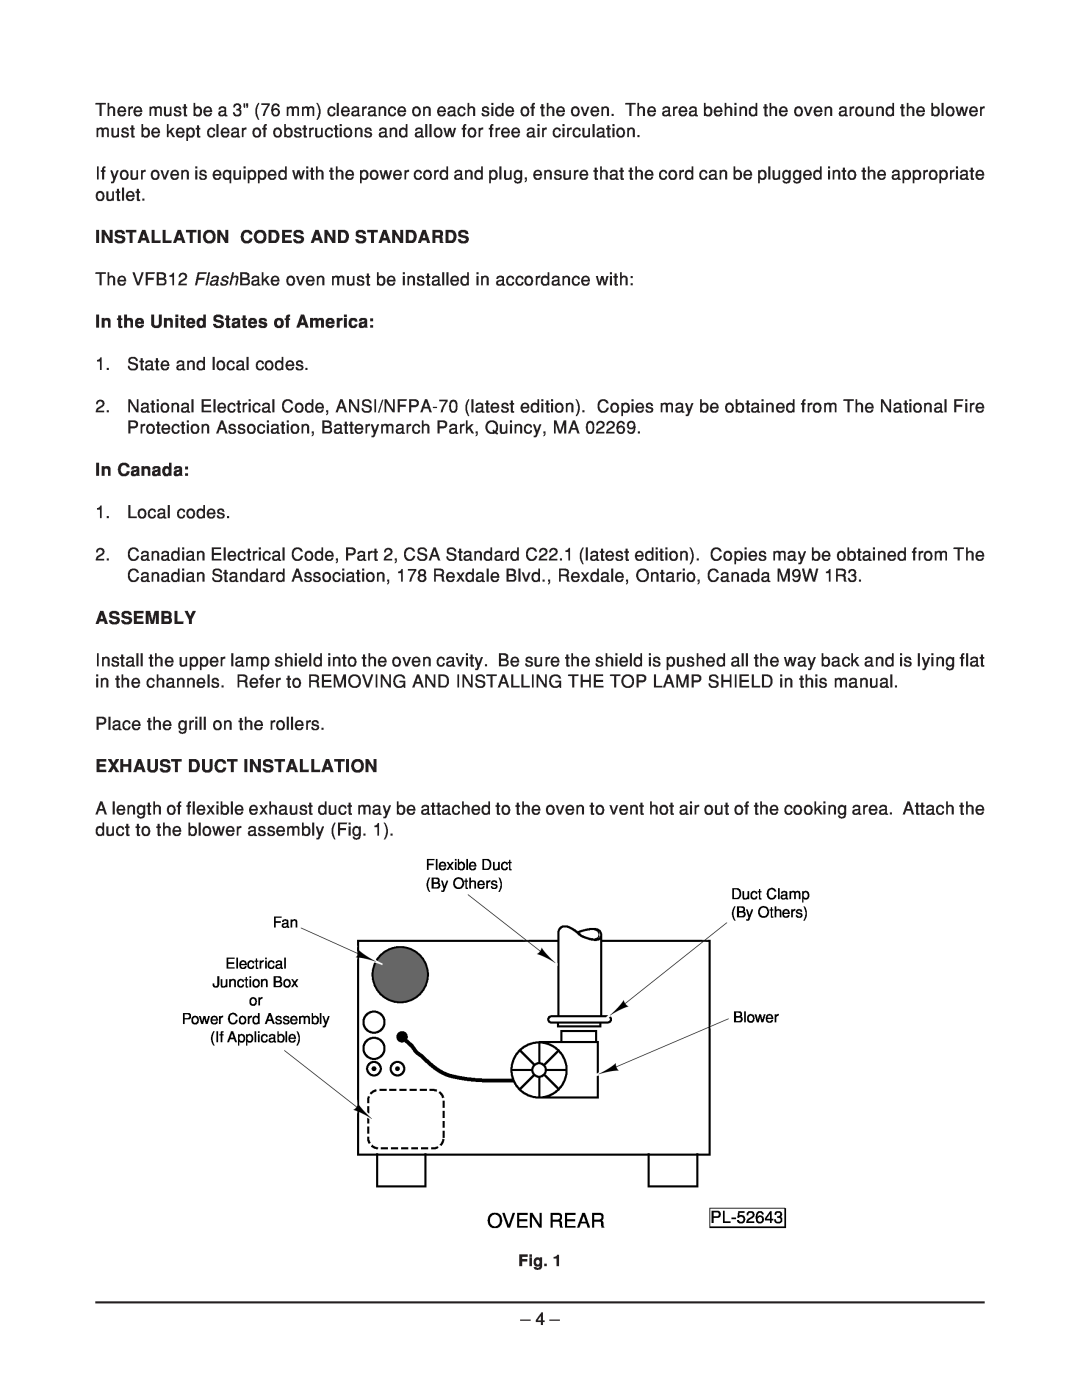 Vulcan-Hart ML-114905 Installation Codes And Standards, In the United States of America, In Canada, Assembly, Oven Rear 